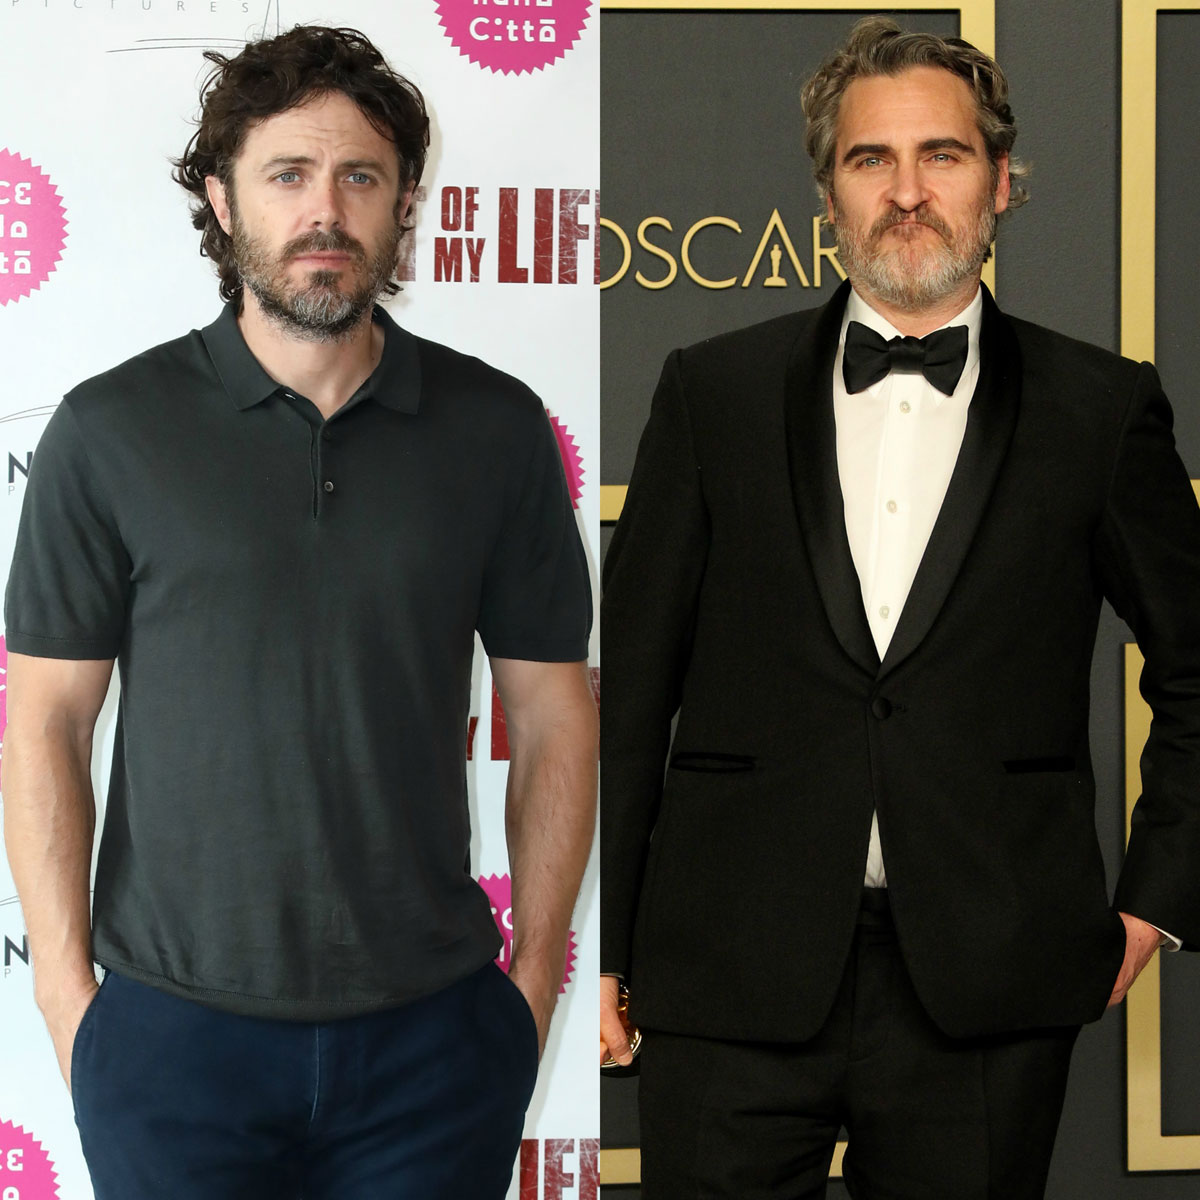 Casey Affleck and Joaquin Phoenix are related